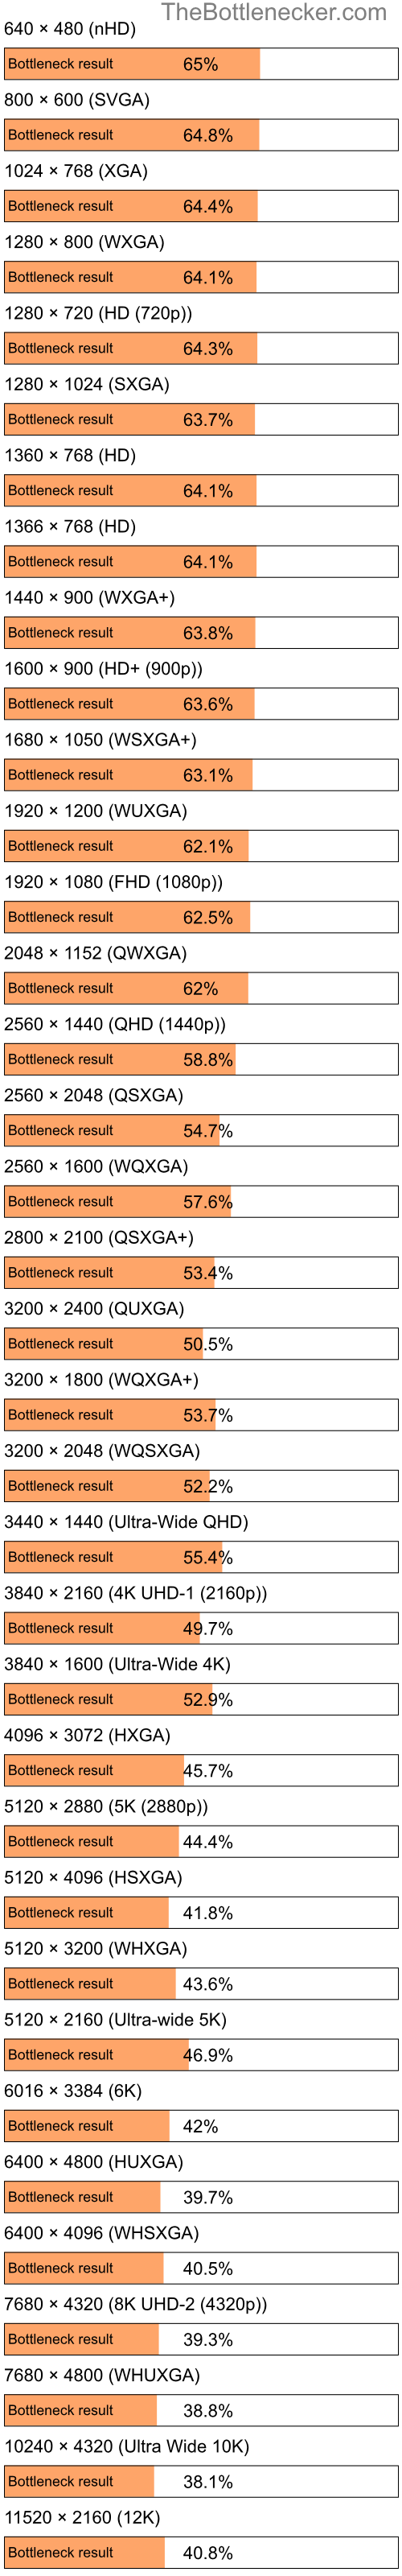 Bottleneck results by resolution for Intel Celeron N3450 and NVIDIA GeForce RTX 3060 Ti in Graphic Card Intense Tasks